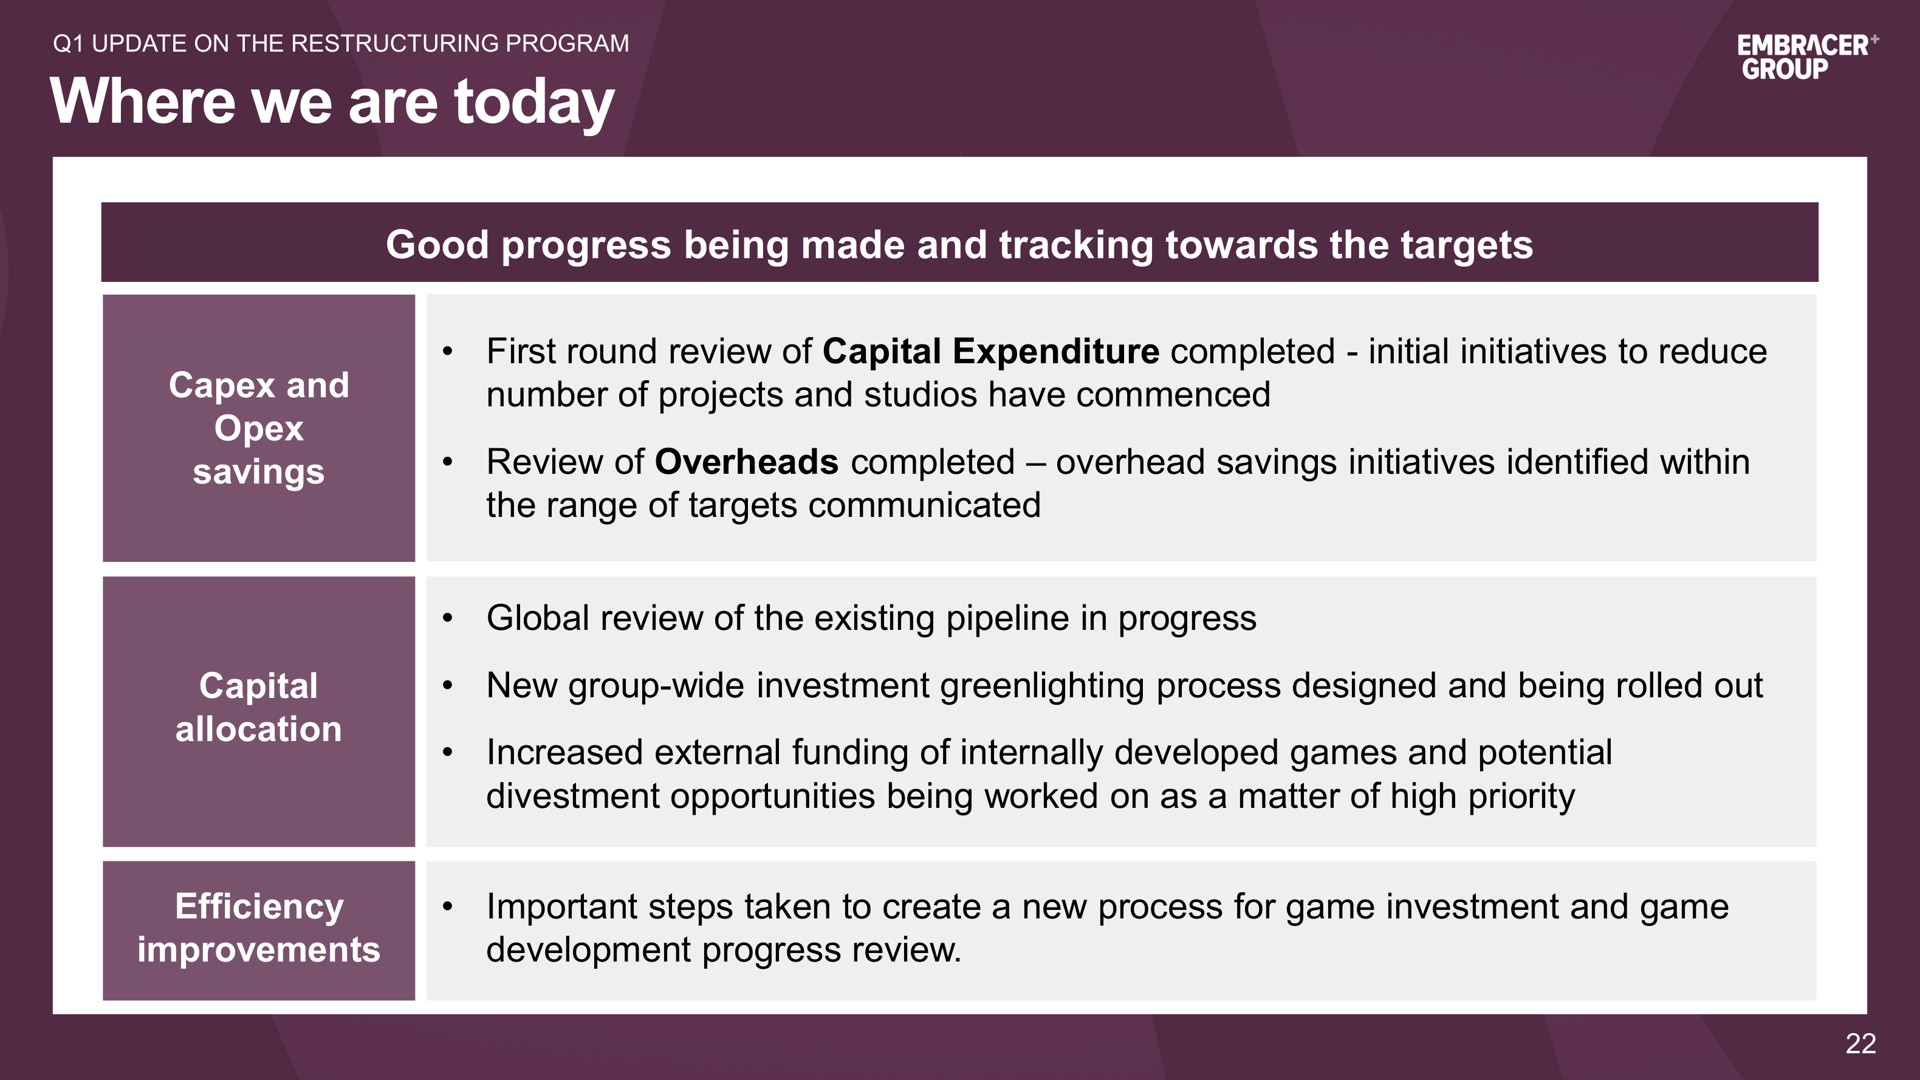 where we are today good progress being made and tracking towards the targets and savings capital allocation efficiency improvements first round review of capital expenditure completed initial initiatives to reduce number of projects and studios have commenced review of overheads completed overhead savings initiatives identified within the range of targets communicated global review of the existing pipeline in progress new group wide investment process designed and being rolled out increased external funding of internally developed games and potential divestment opportunities being worked on as a matter of high priority important steps taken to create a new process for game investment and game development progress review | Embracer Group